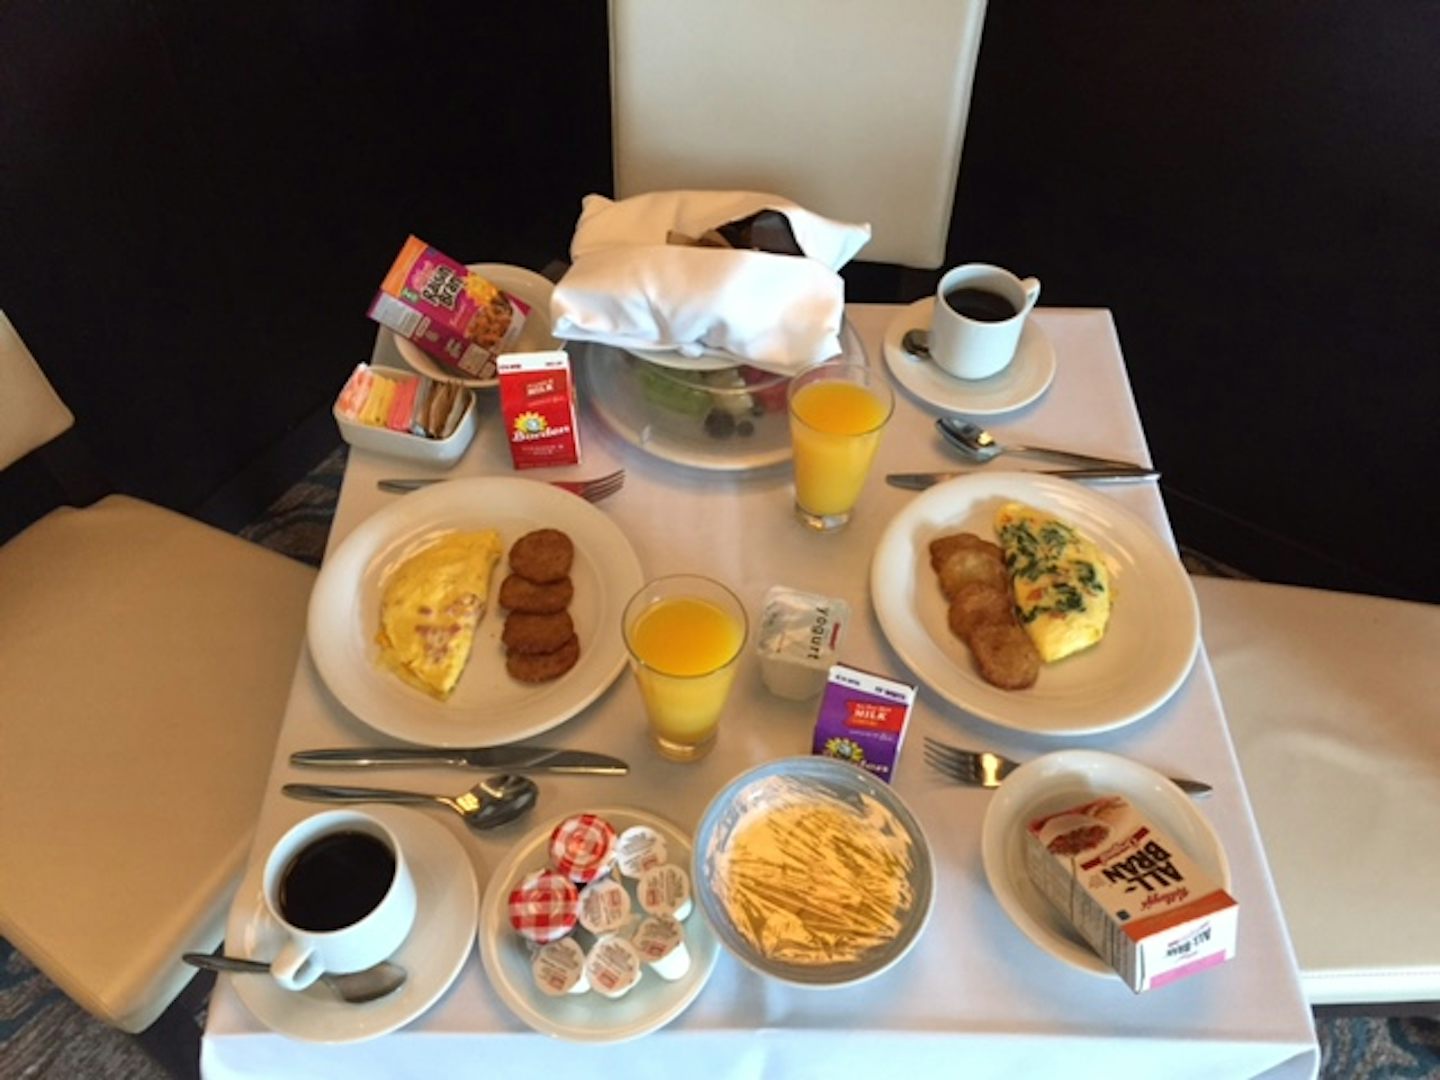 Room service one of the mornings.